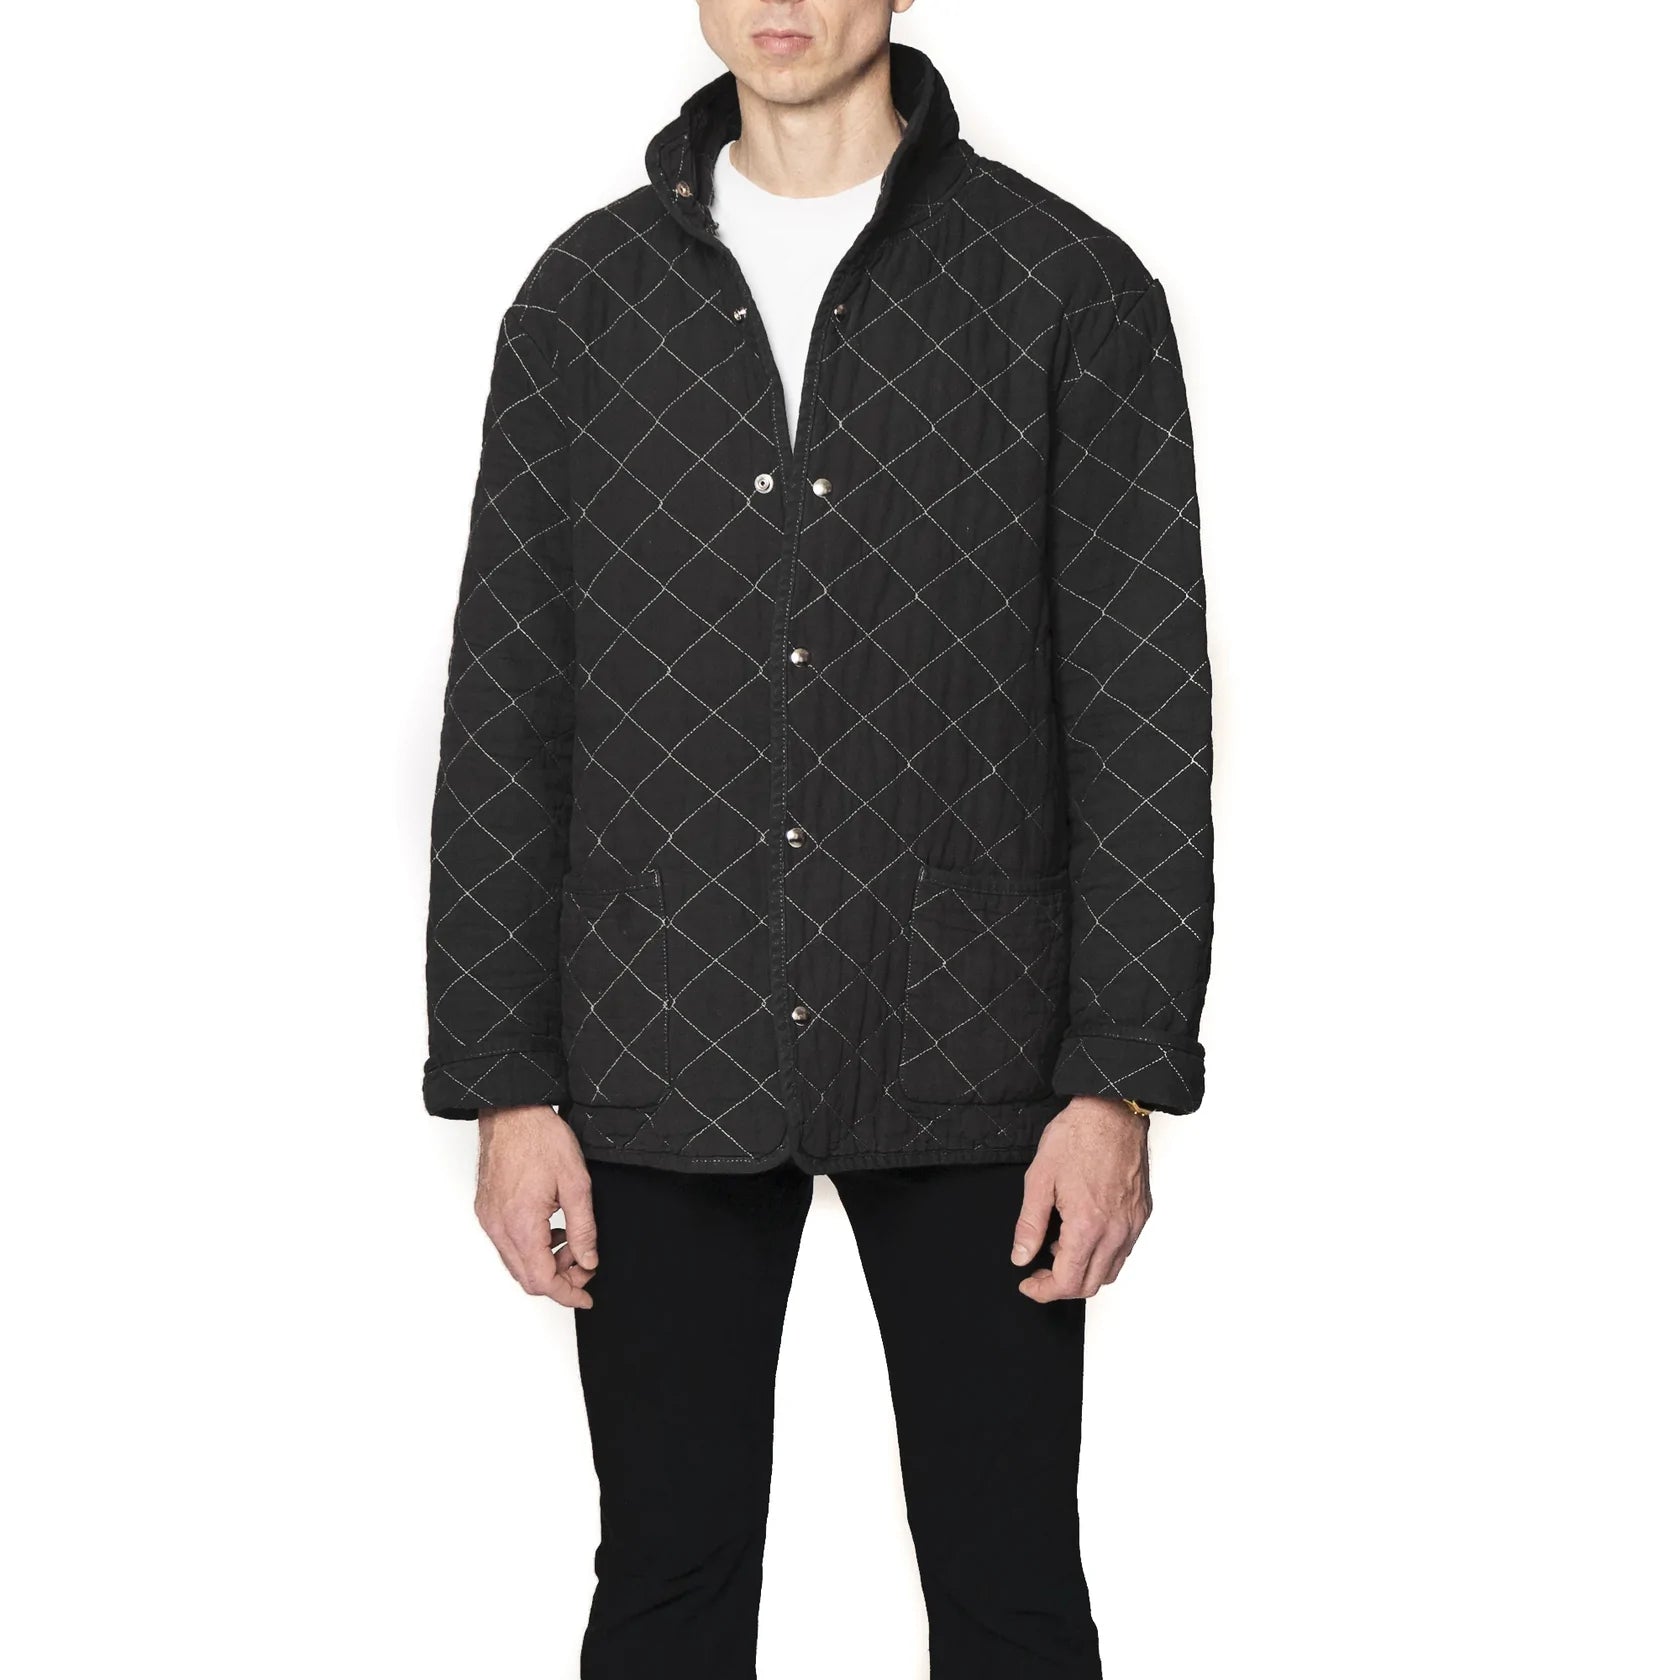 Black Quilted Snap Jacket by Utility Canvas